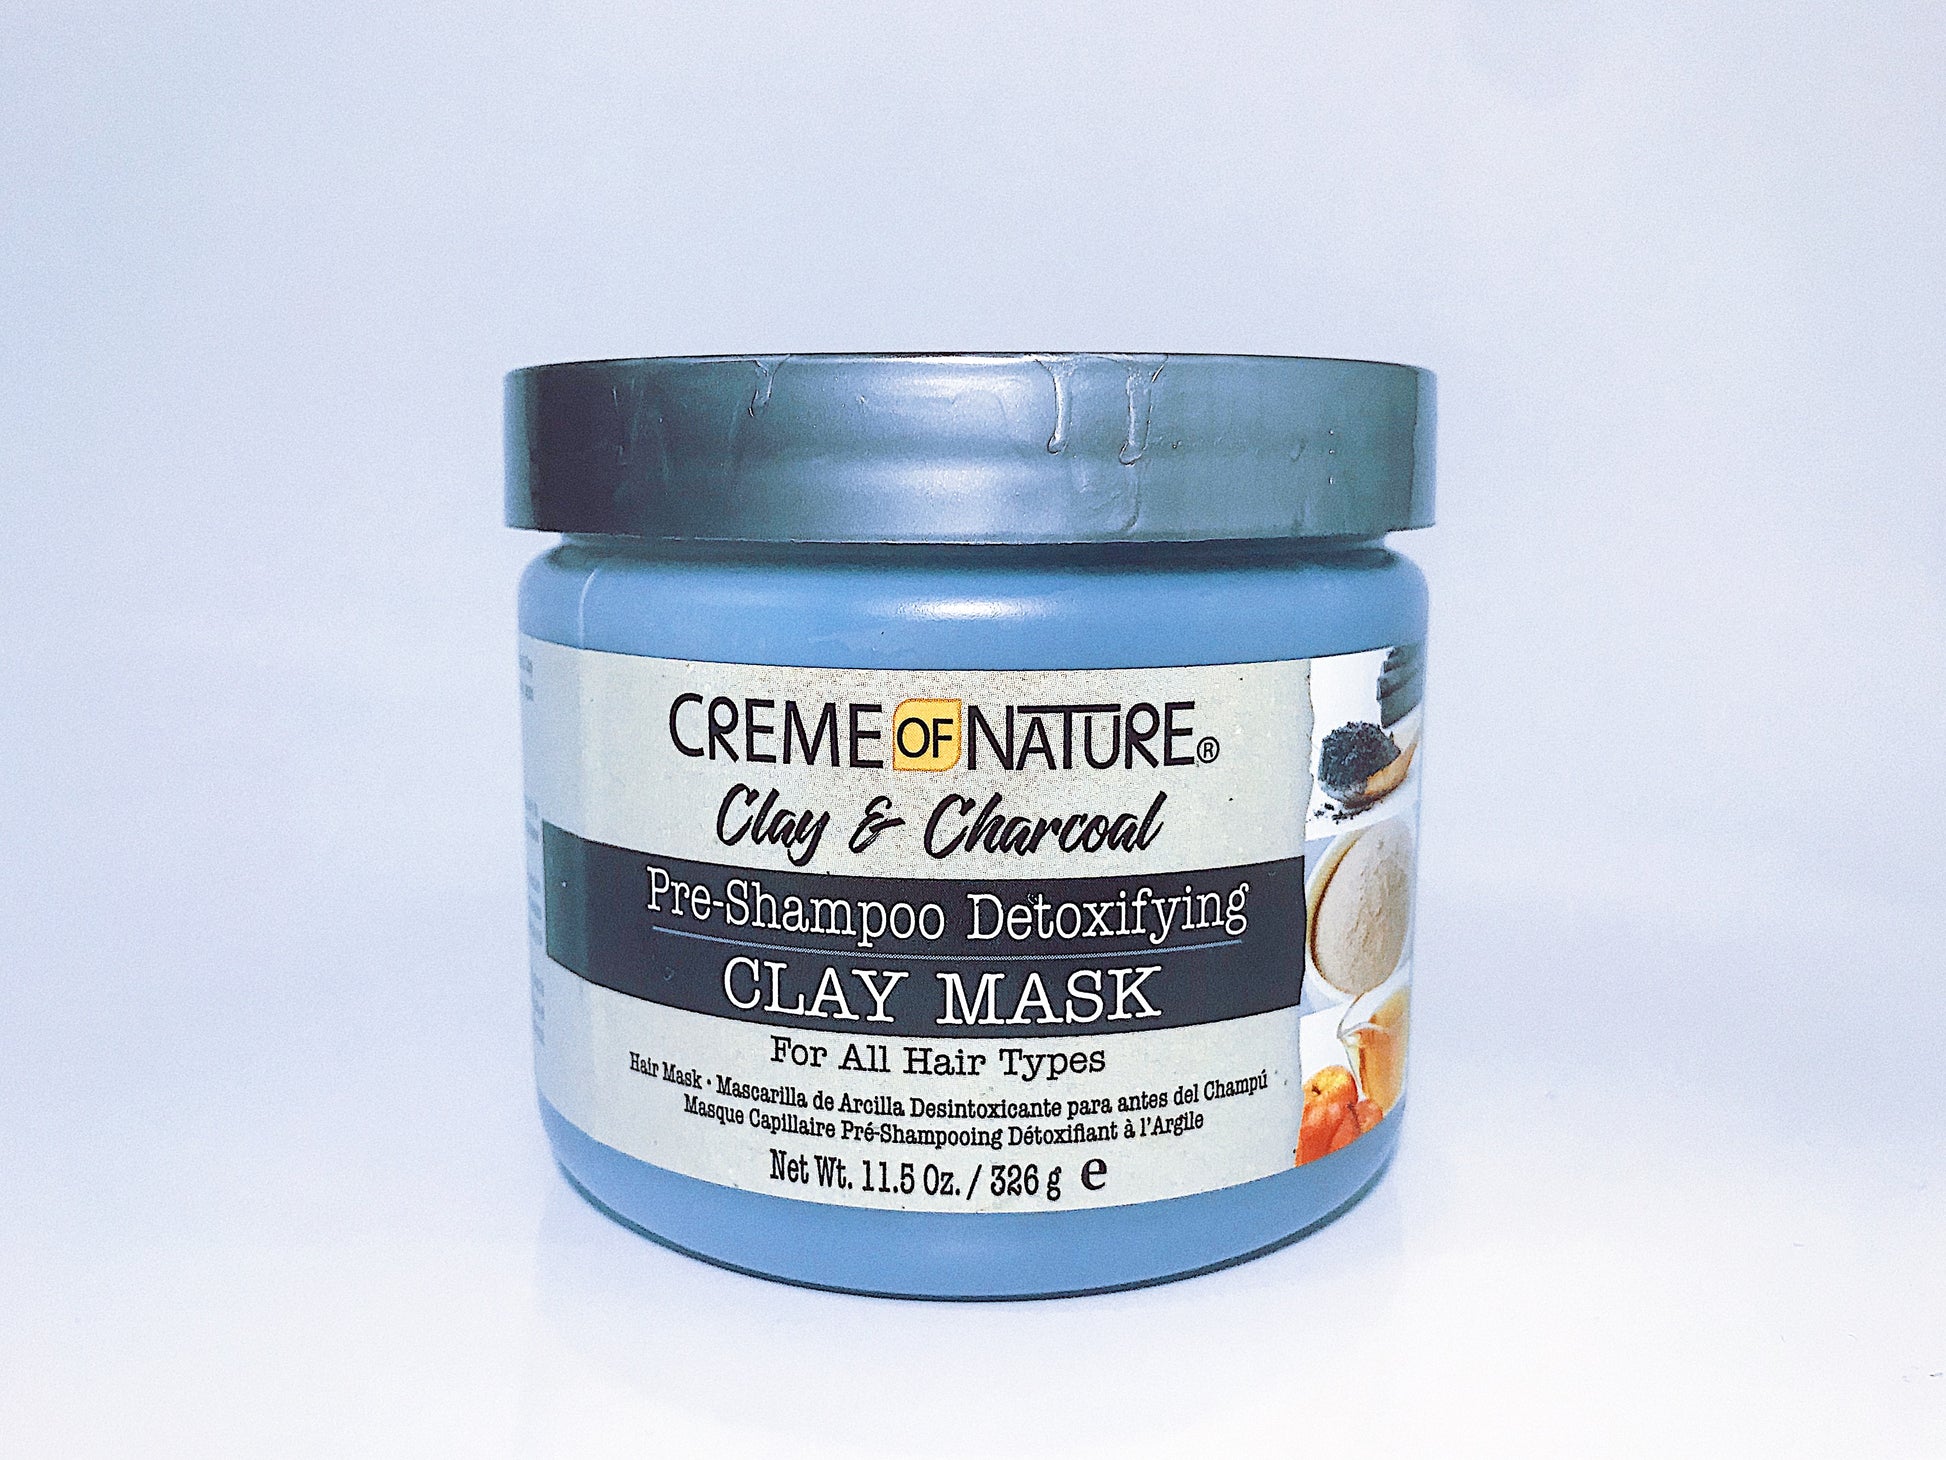 creme-of-nature-clay-charcoal-clay-mask.jpg